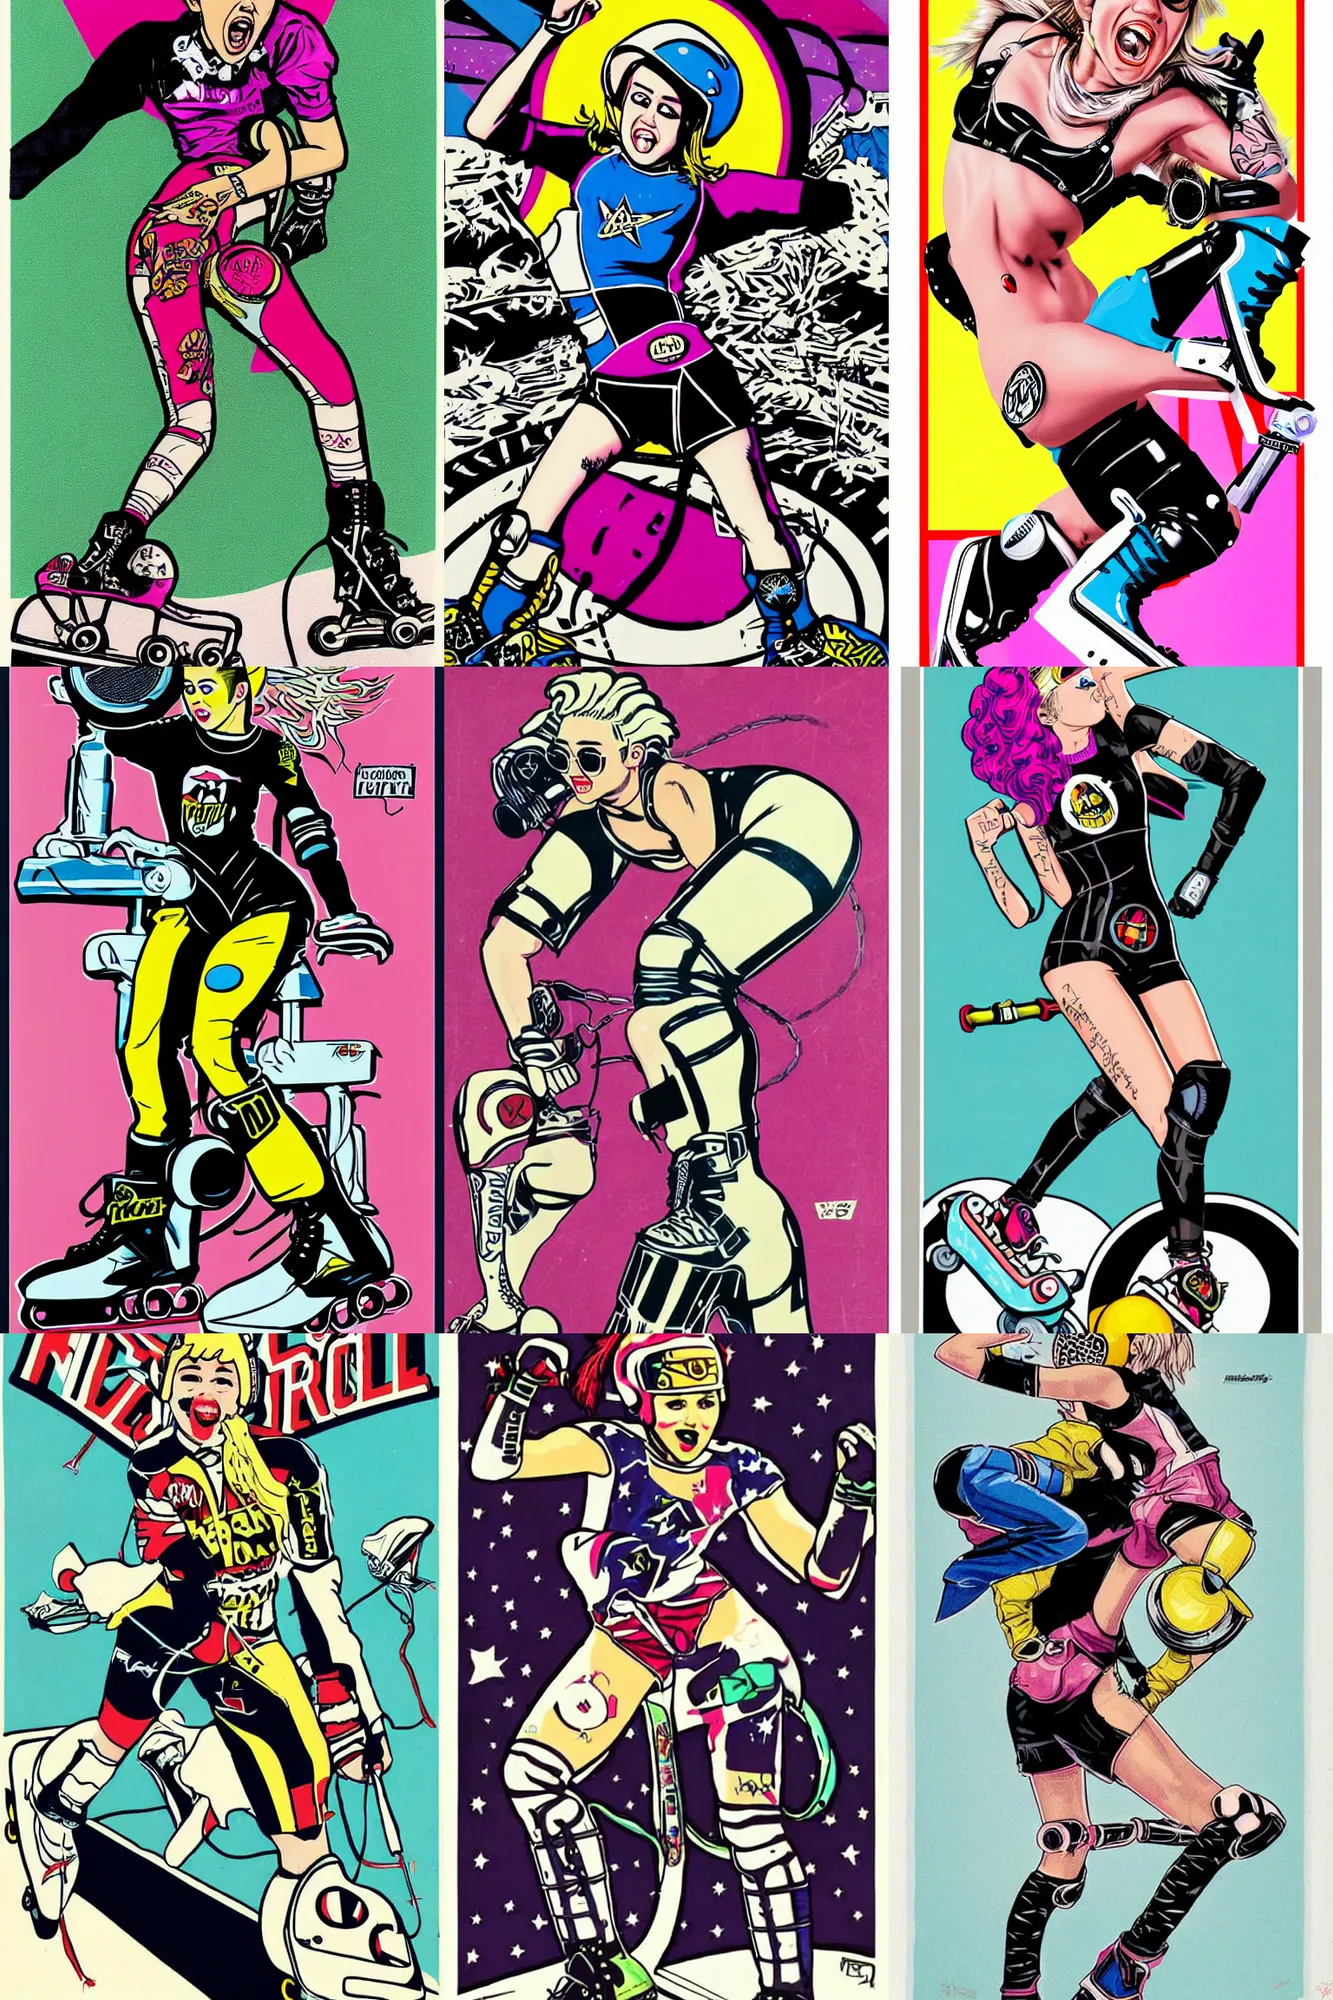 Prompt: Miley Cyrus as roller derby girl portrait, logo, wearing skating helmet, wearing knee and elbow pads, showing victory, Philippe Caza, 3 colour print